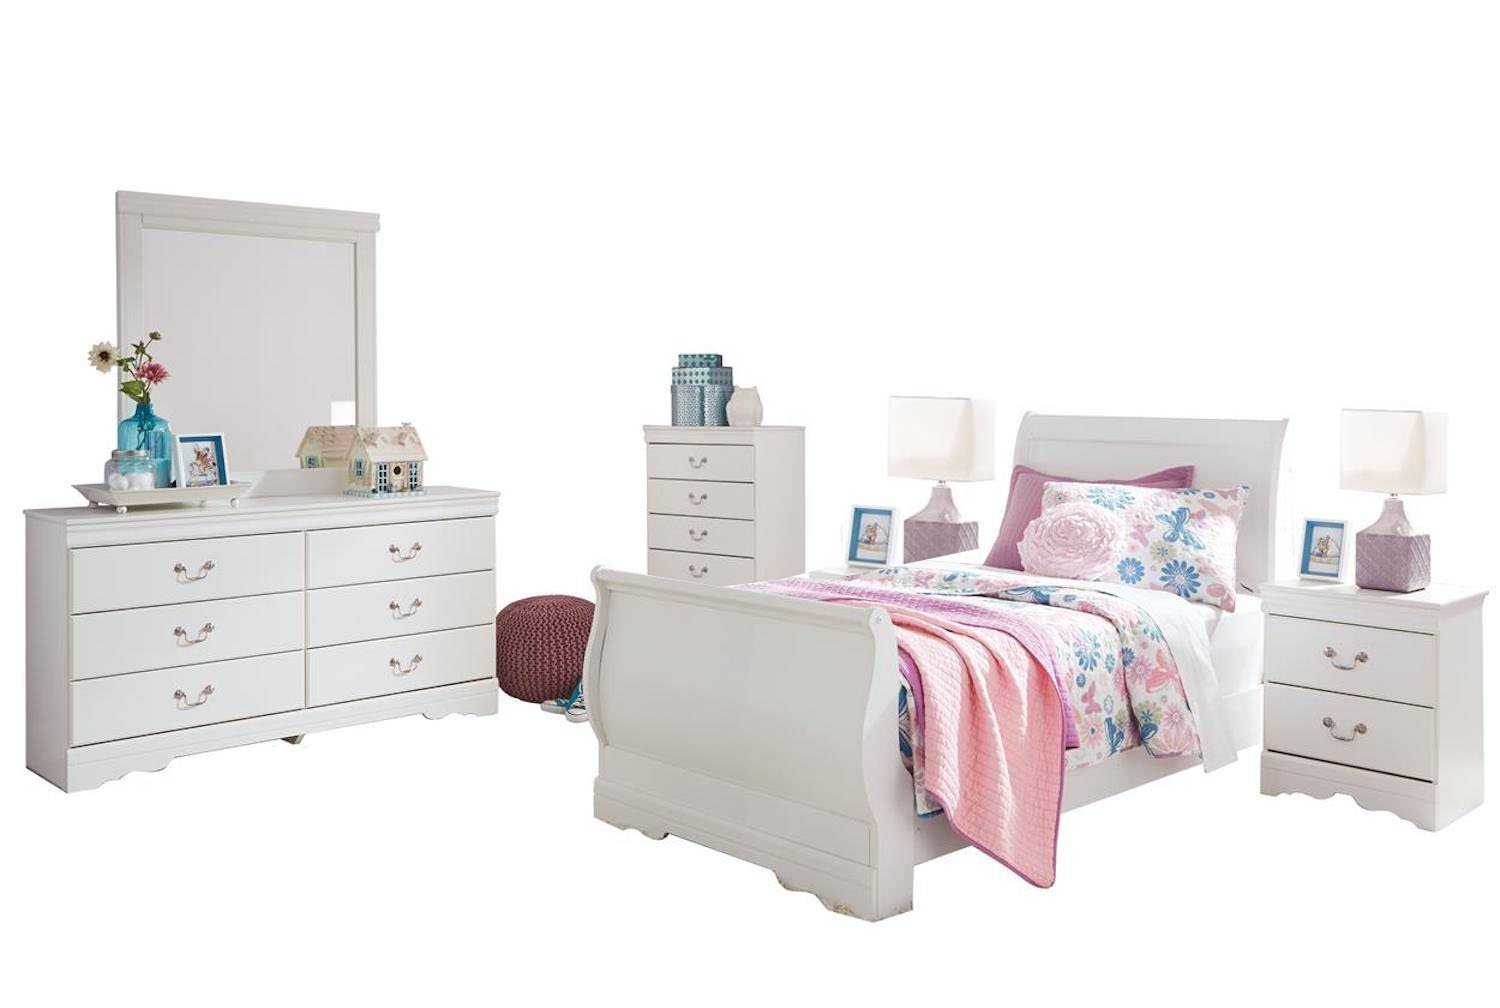 Ashley Furniture 6 Piece Twin Bedroom Set For Girl Free Shipping